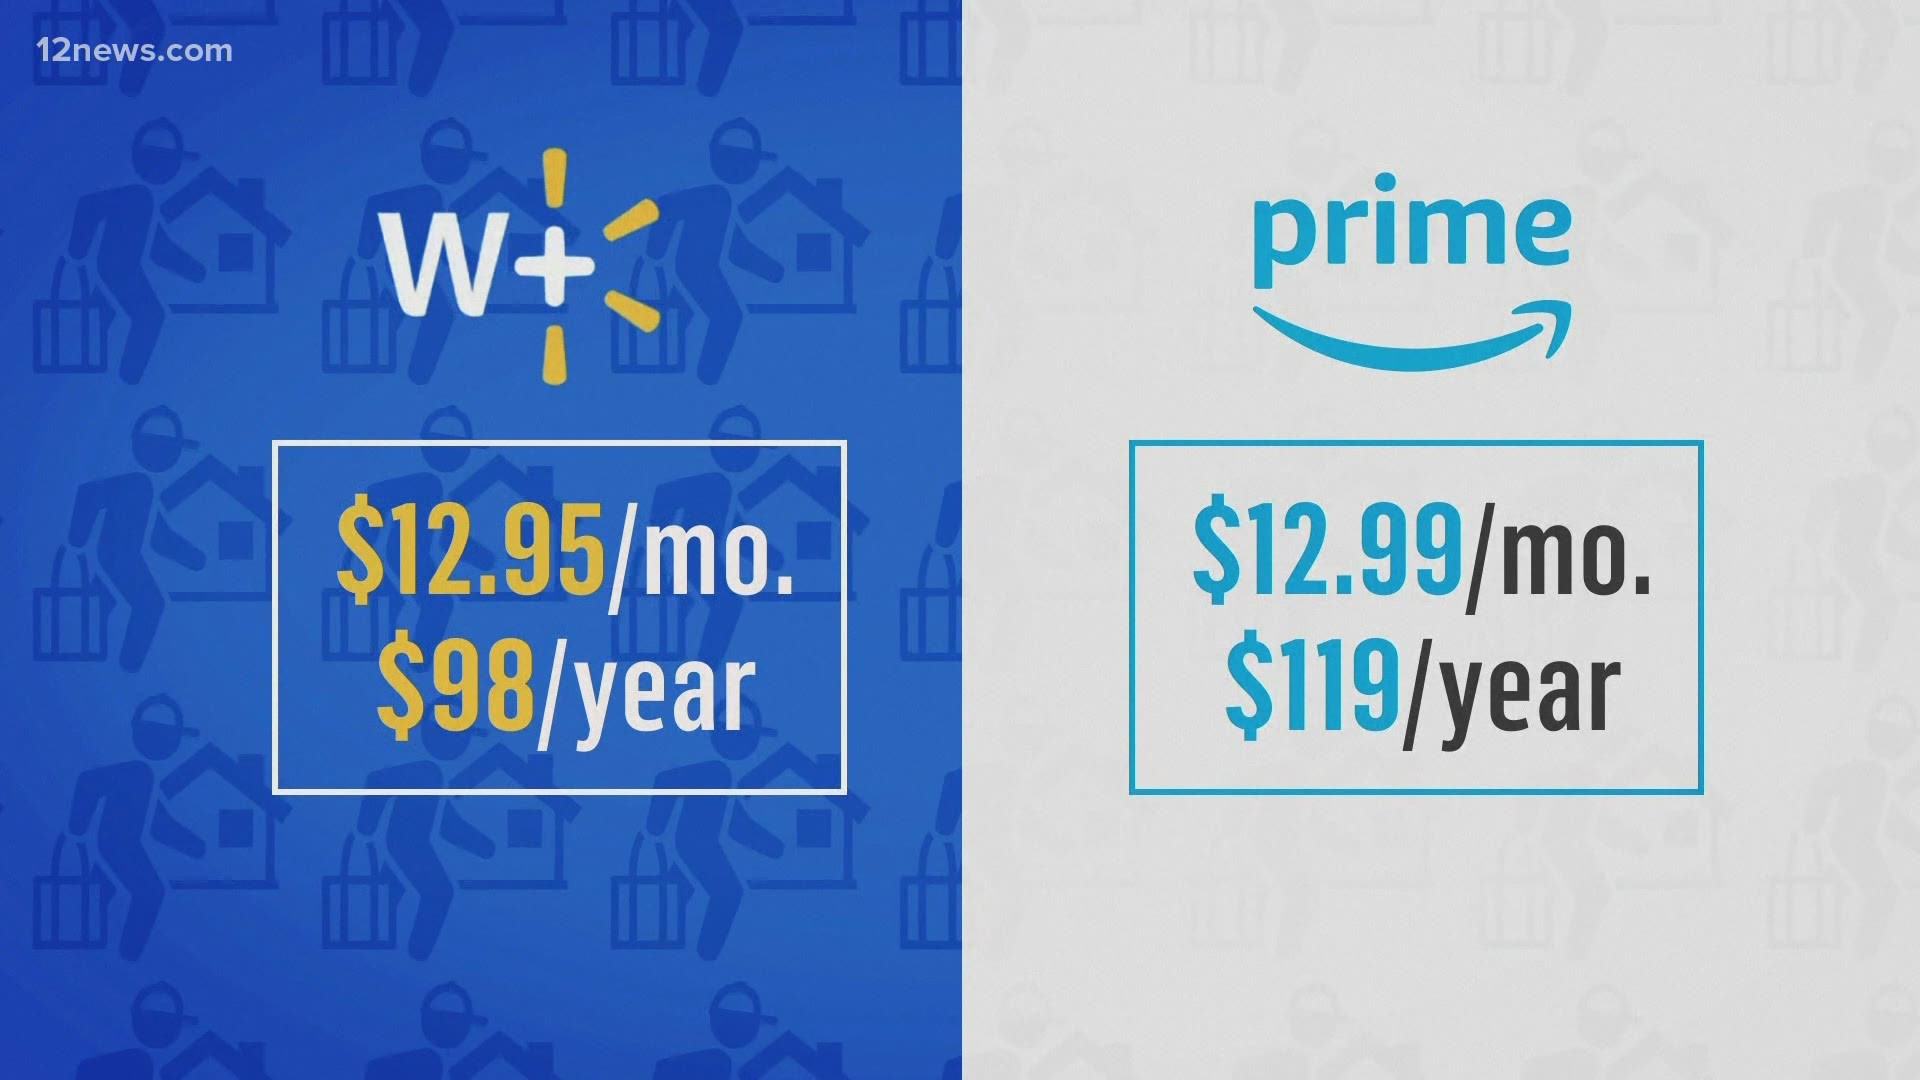 With the continued pandemic, more people are buying groceries online. While Amazon and Walmart have similar deals, their overall costs are different.